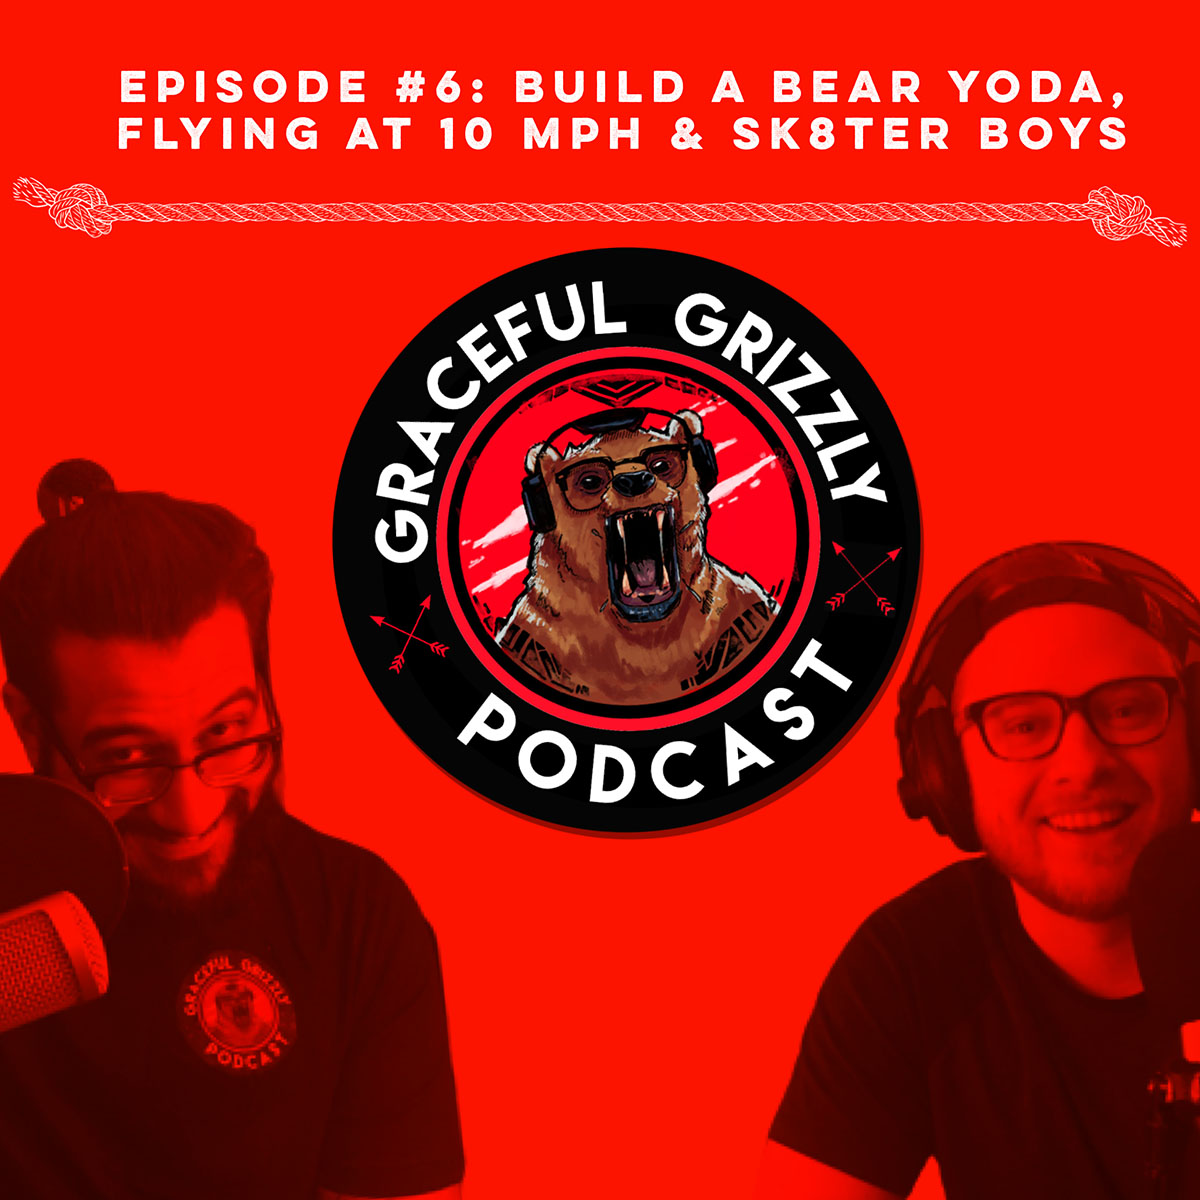 Episode 6 - Graceful Grizzly Podcast